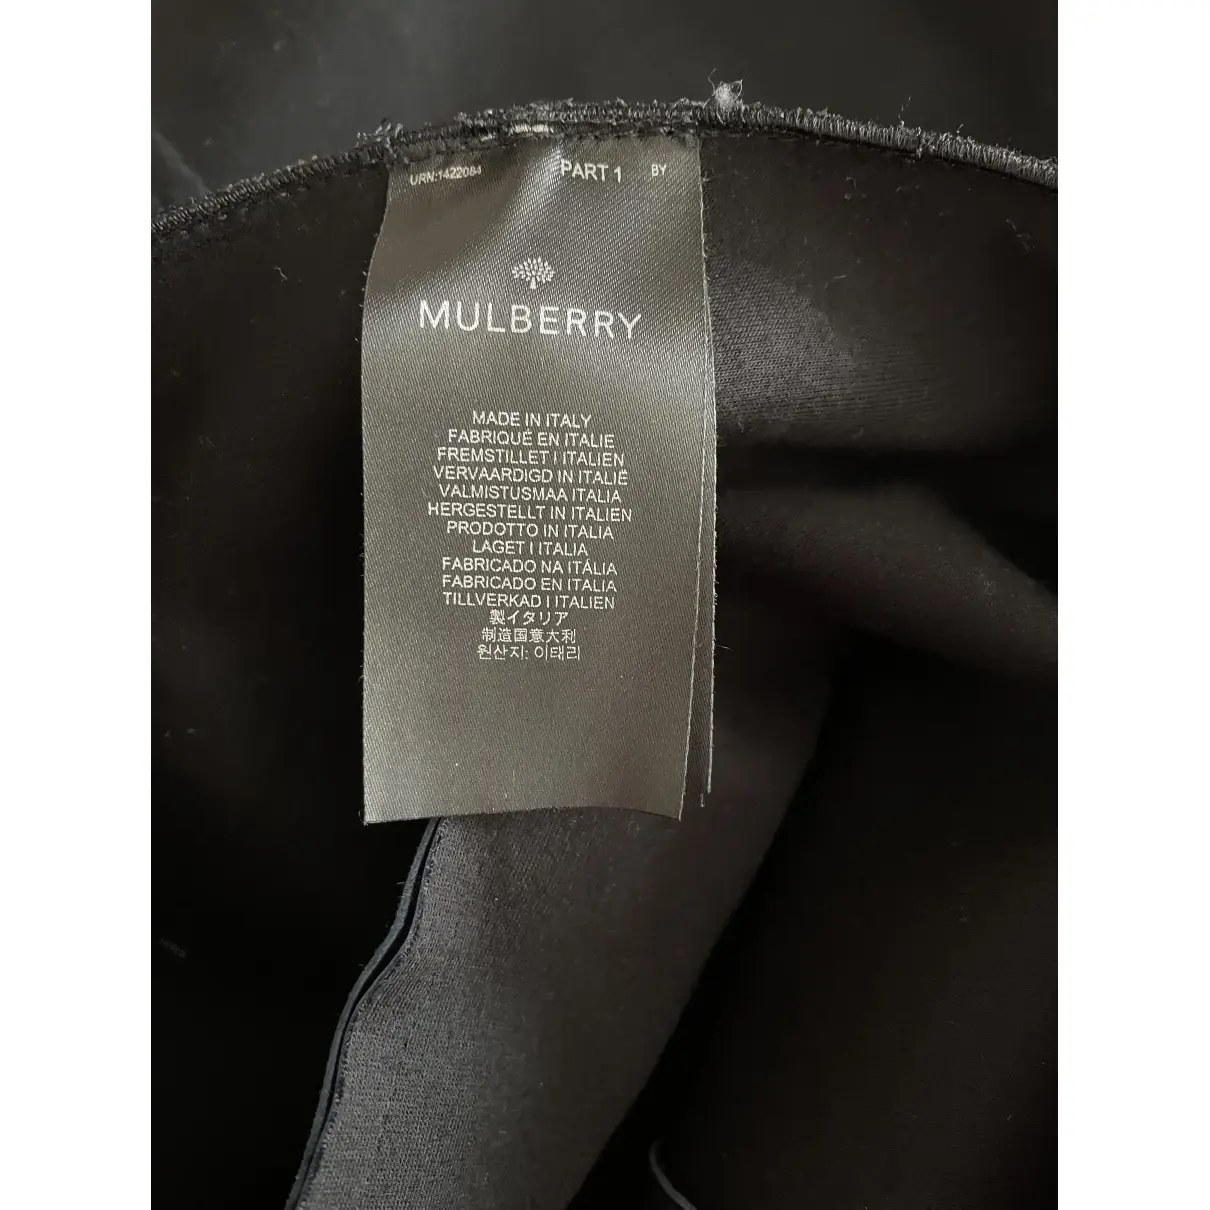 Buy Mulberry Leather coat online